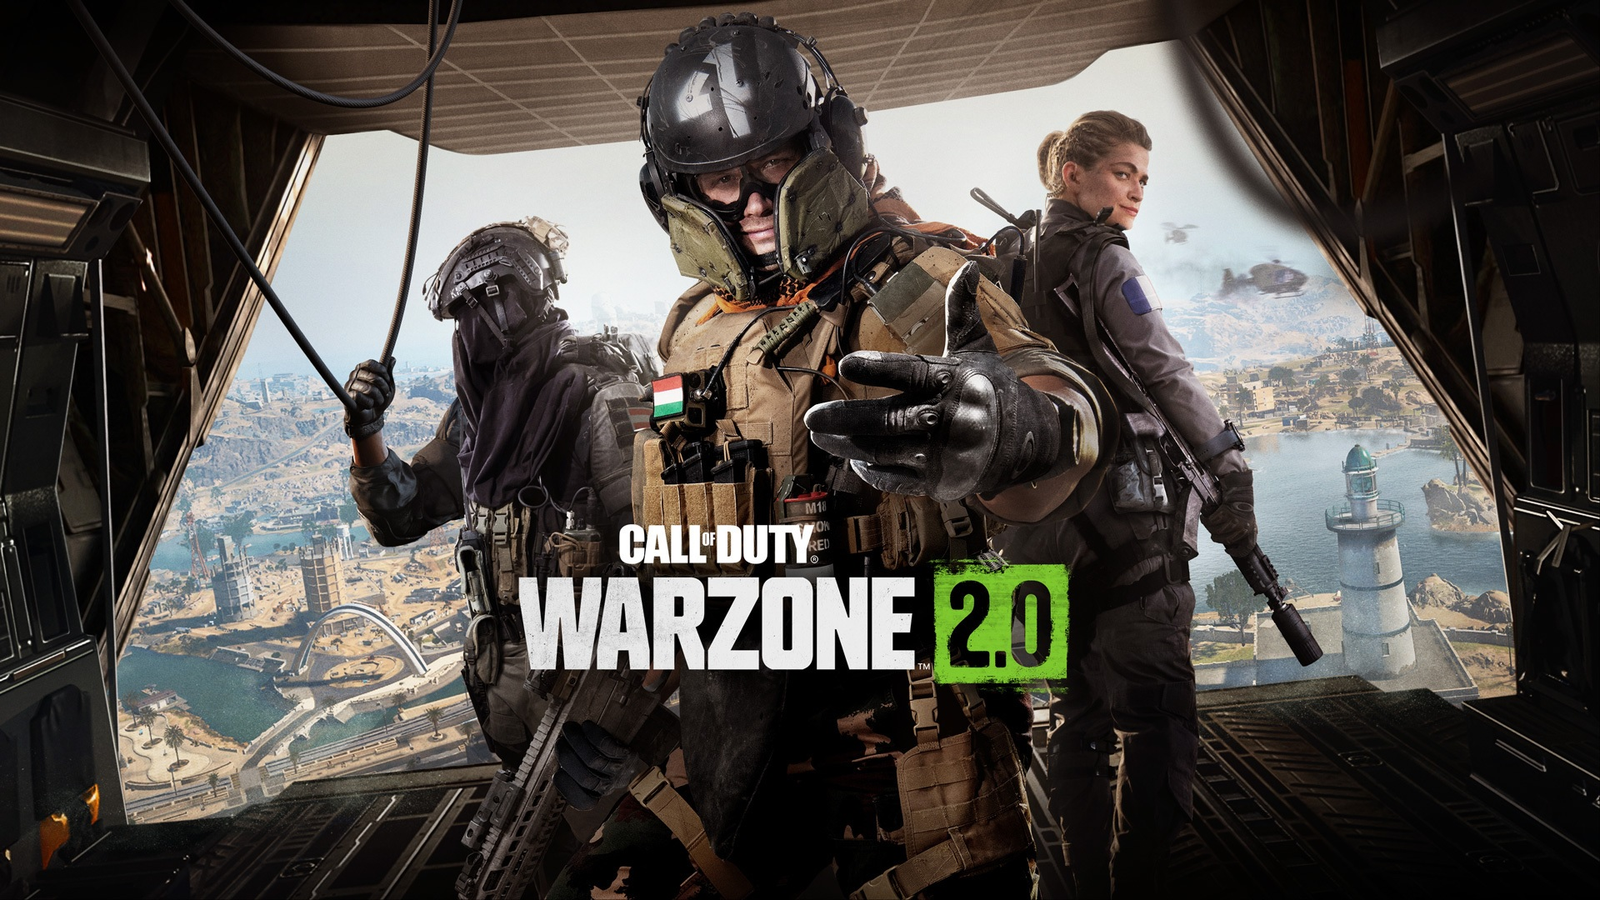 What time does Call of Duty: Warzone release?